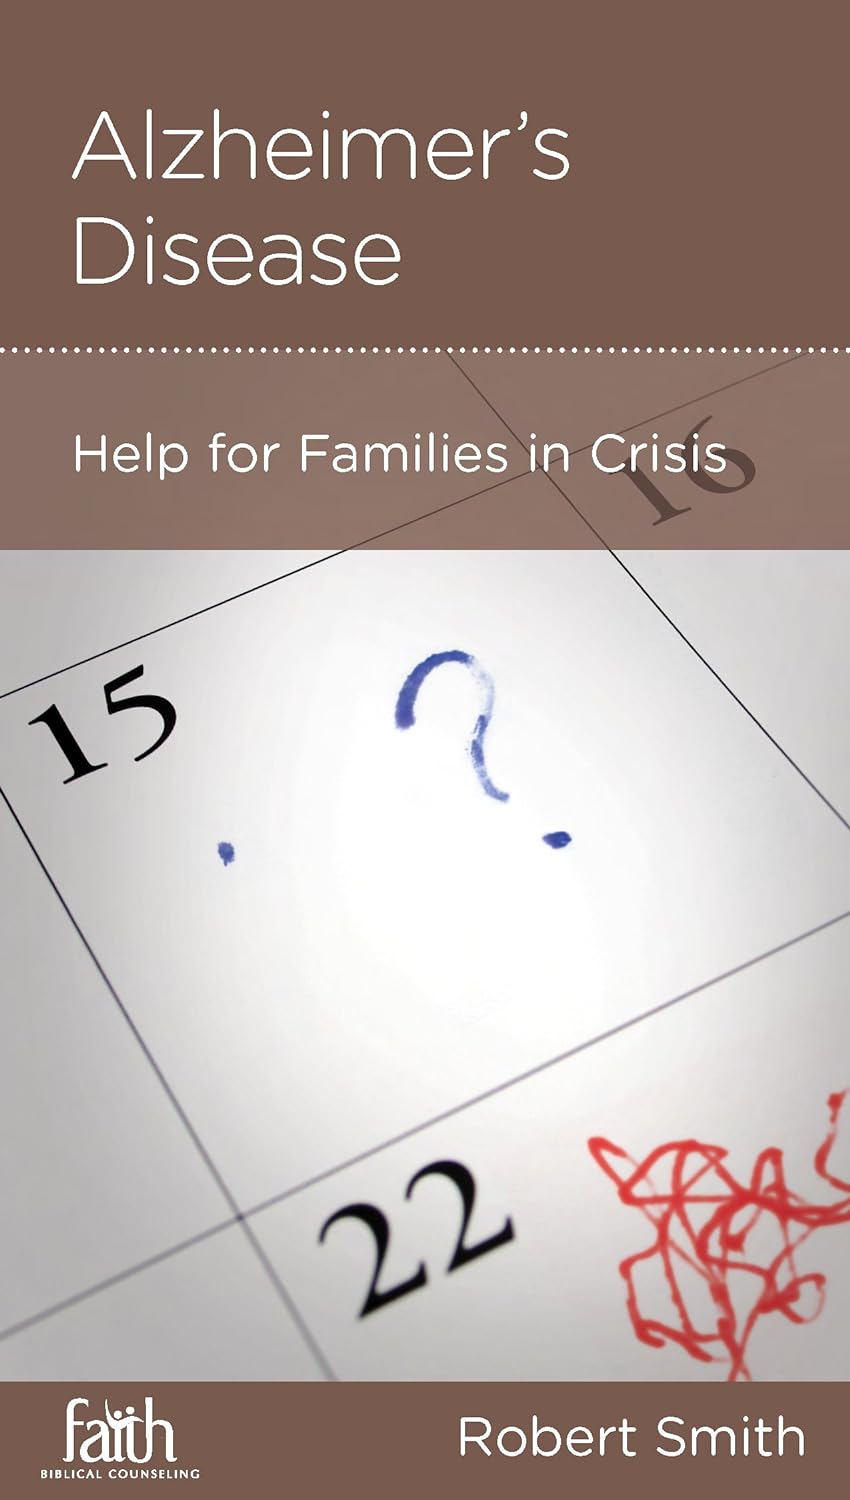 Alzheimer's Disease: Help for Families in Crisis by Robert Smith - Mini Book